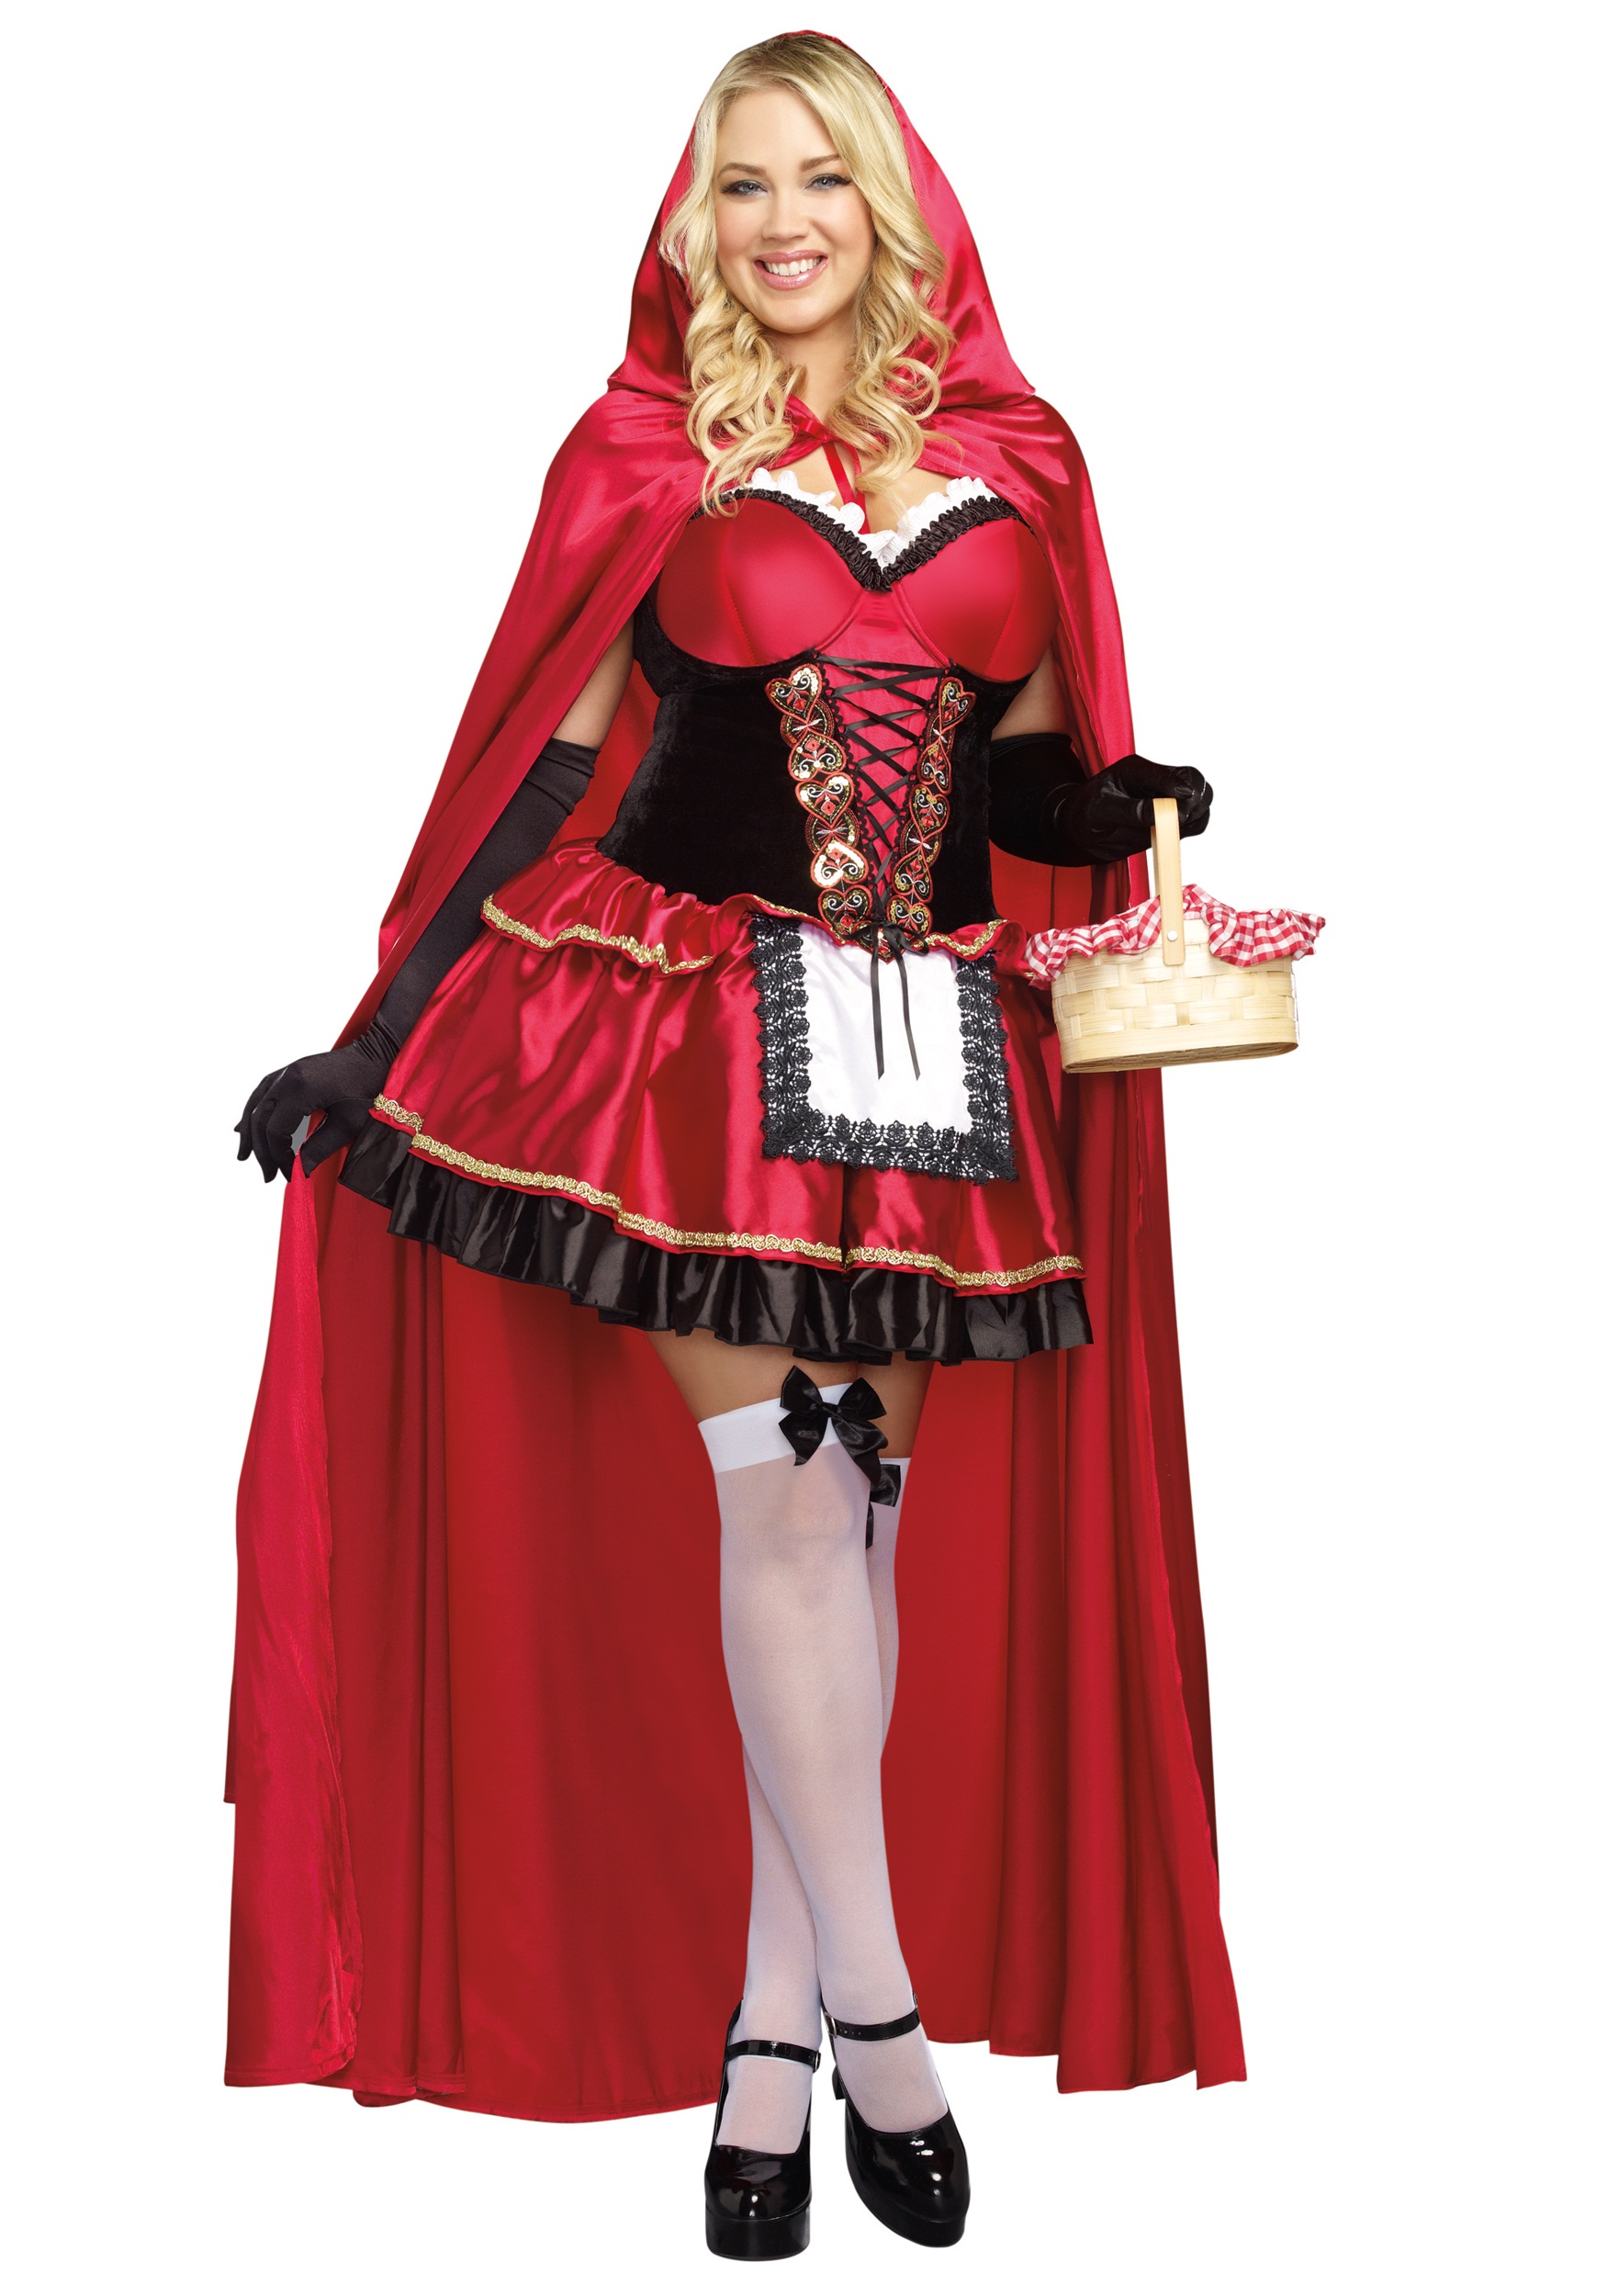 Hot Sexy Dres Plus Size S M L Xl Xxl Costume Adult Little Red Riding Hood Costume Halloween